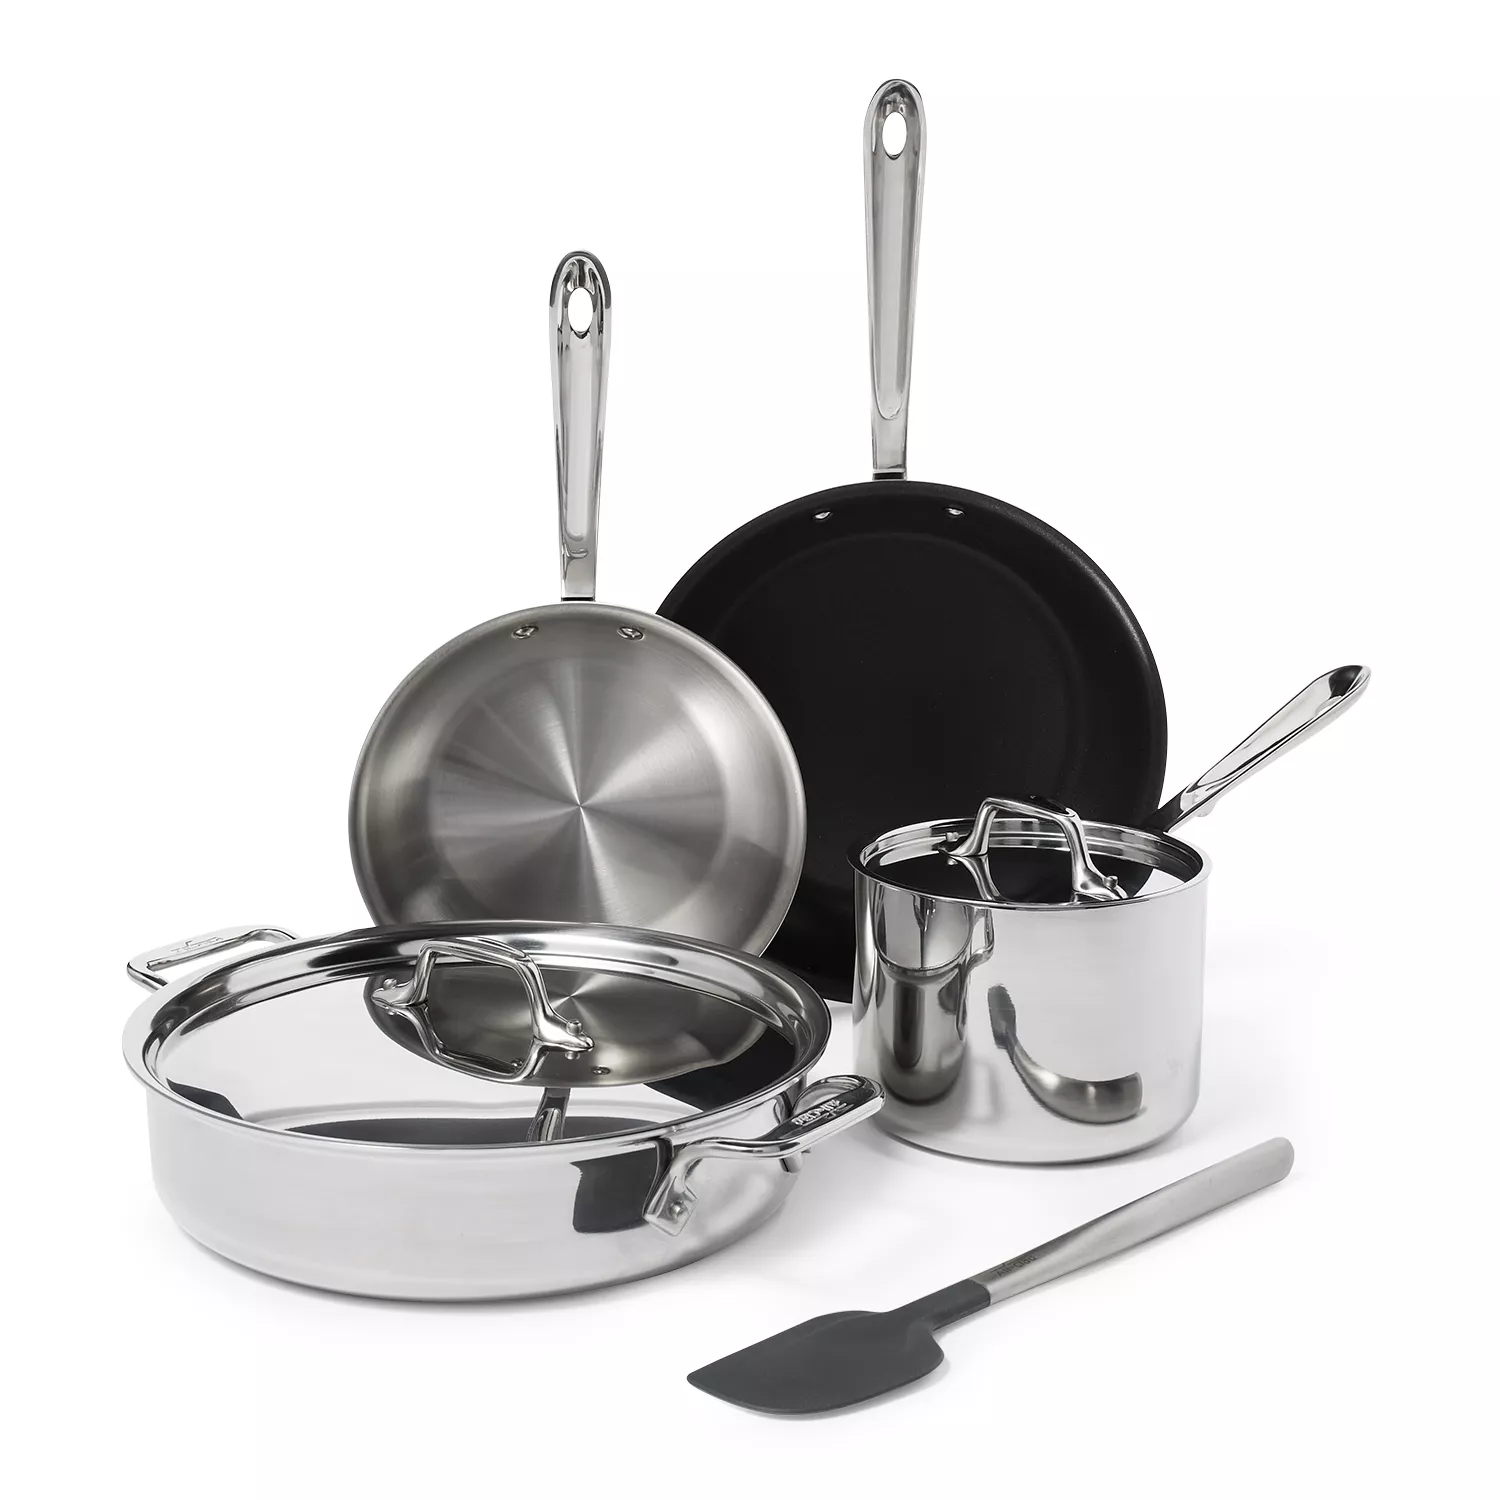 All-Clad d3 Stainless Steel 10-Piece Cookware Set + Reviews